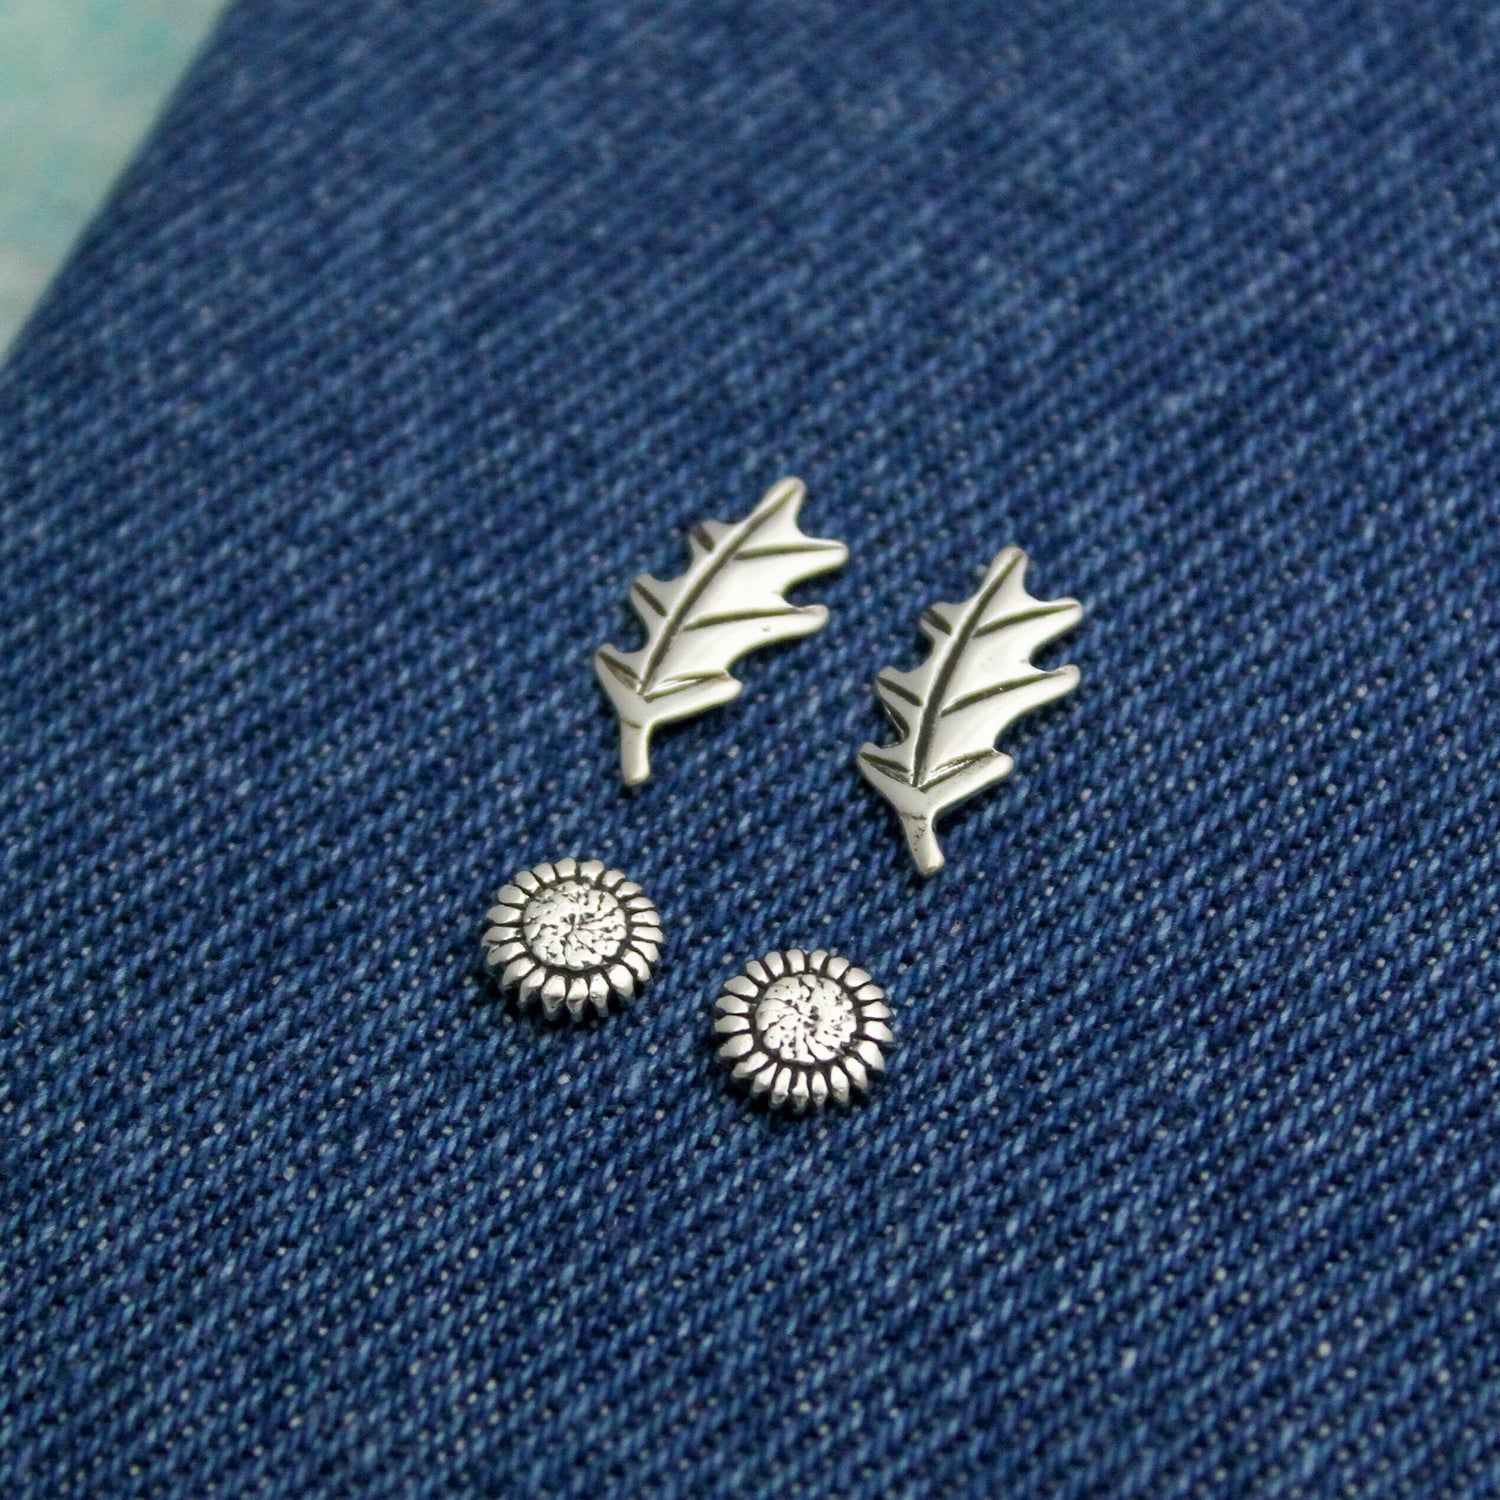 Cute Studs in Sterling Silver Sunflowers and Fall Leaves, Minimalist Silver Stud Earrings, Cute Gift for Her, Fall Style Stud Earrings